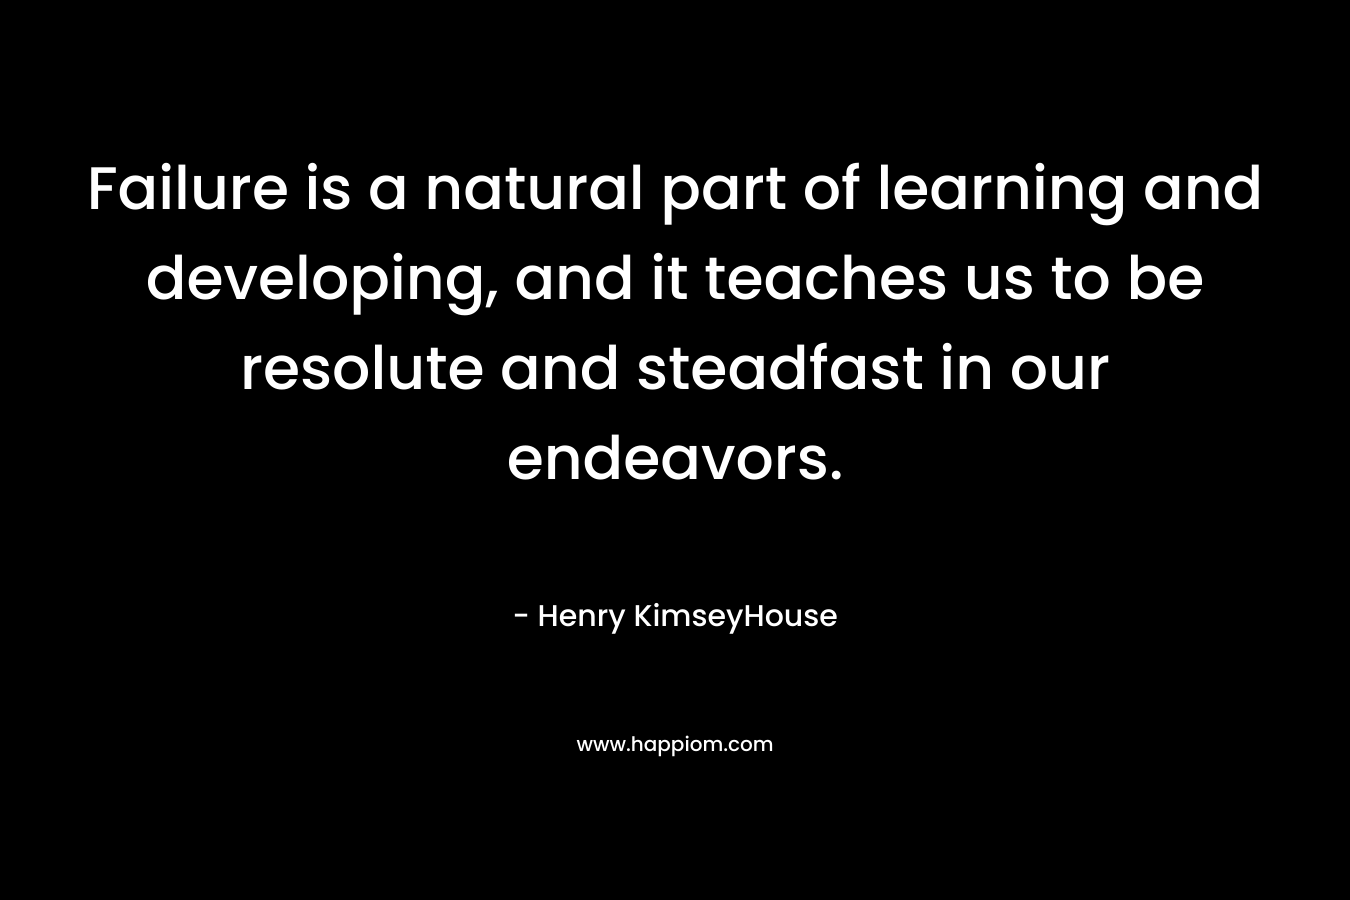 Failure is a natural part of learning and developing, and it teaches us to be resolute and steadfast in our endeavors. – Henry KimseyHouse